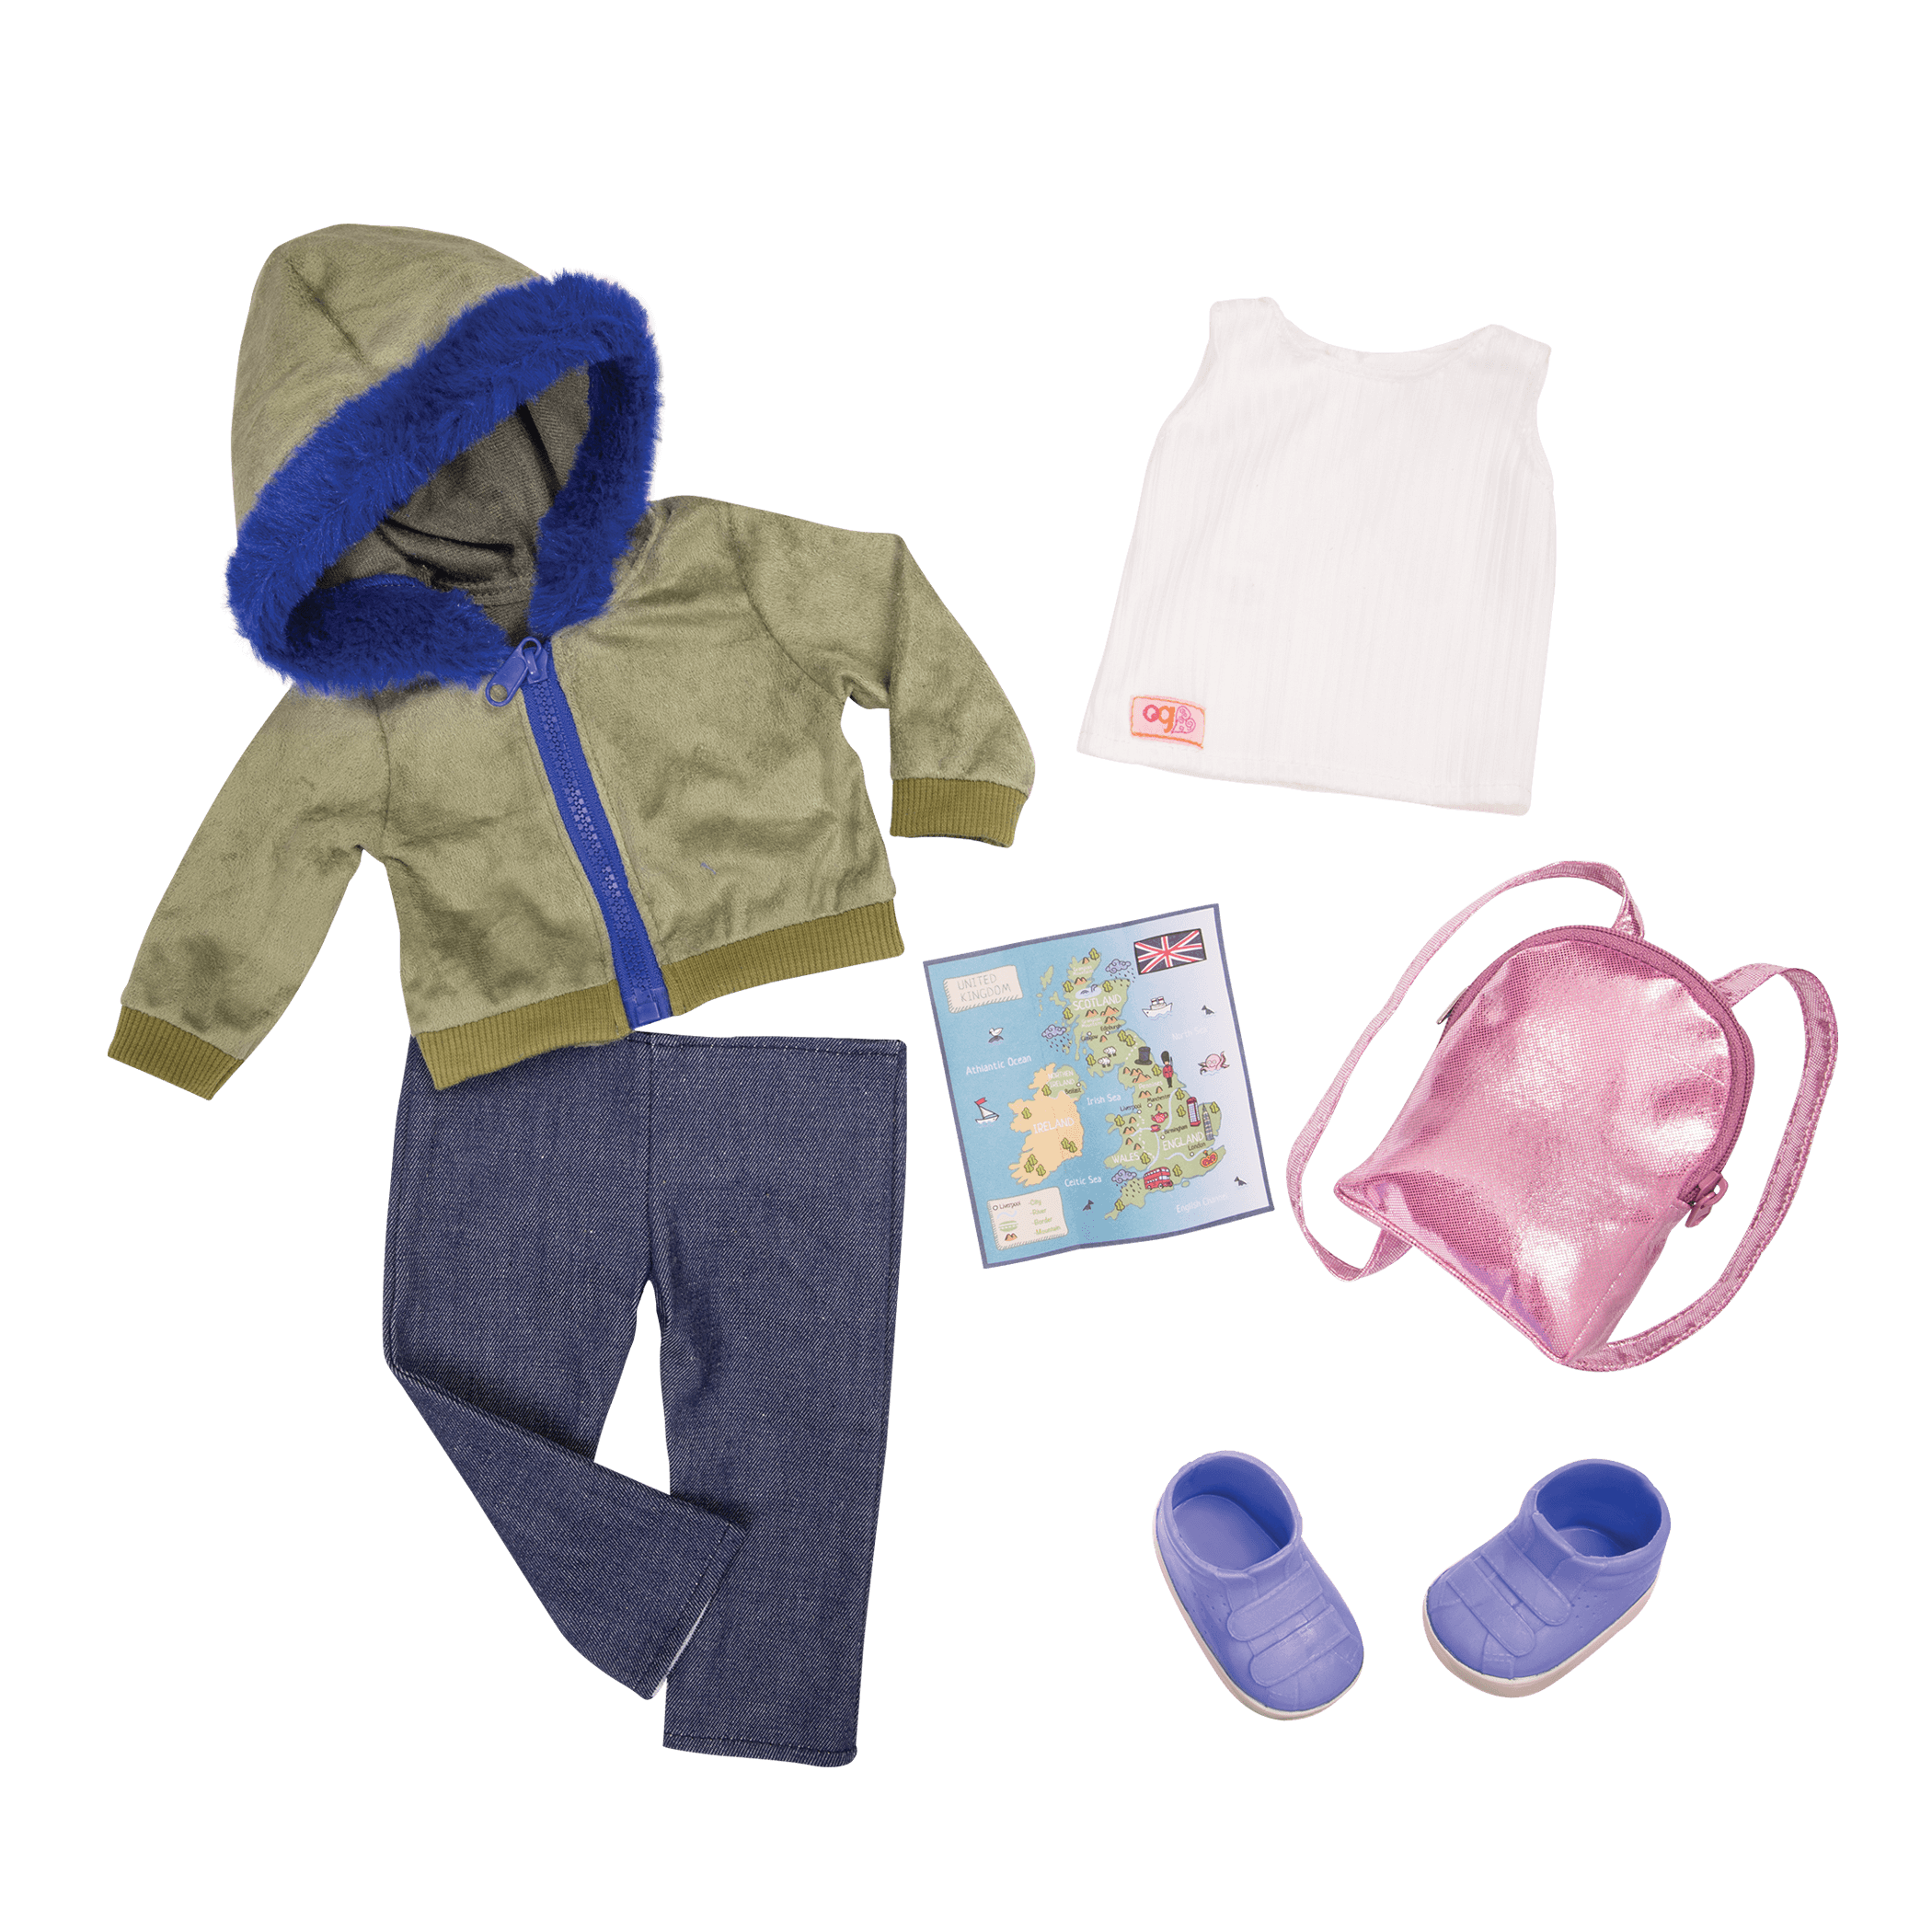 Adventurer outfit and map for 18-inch doll